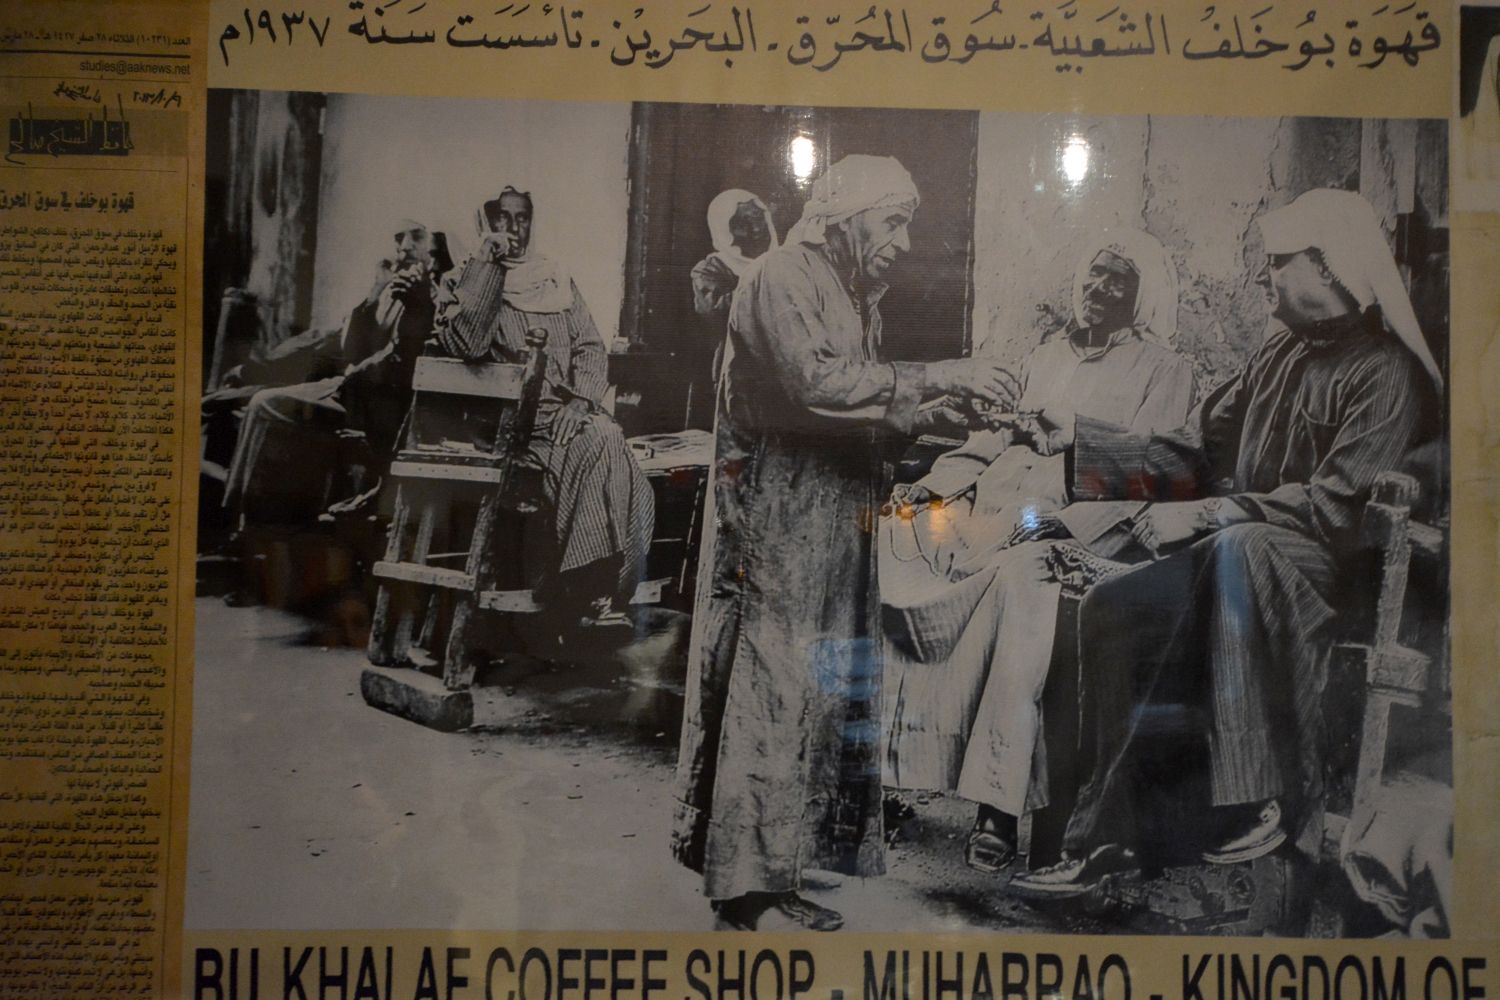 Detail of the signage in the Bu Khalaf Caf‚, wih a historic photo and text in English and Arabic.